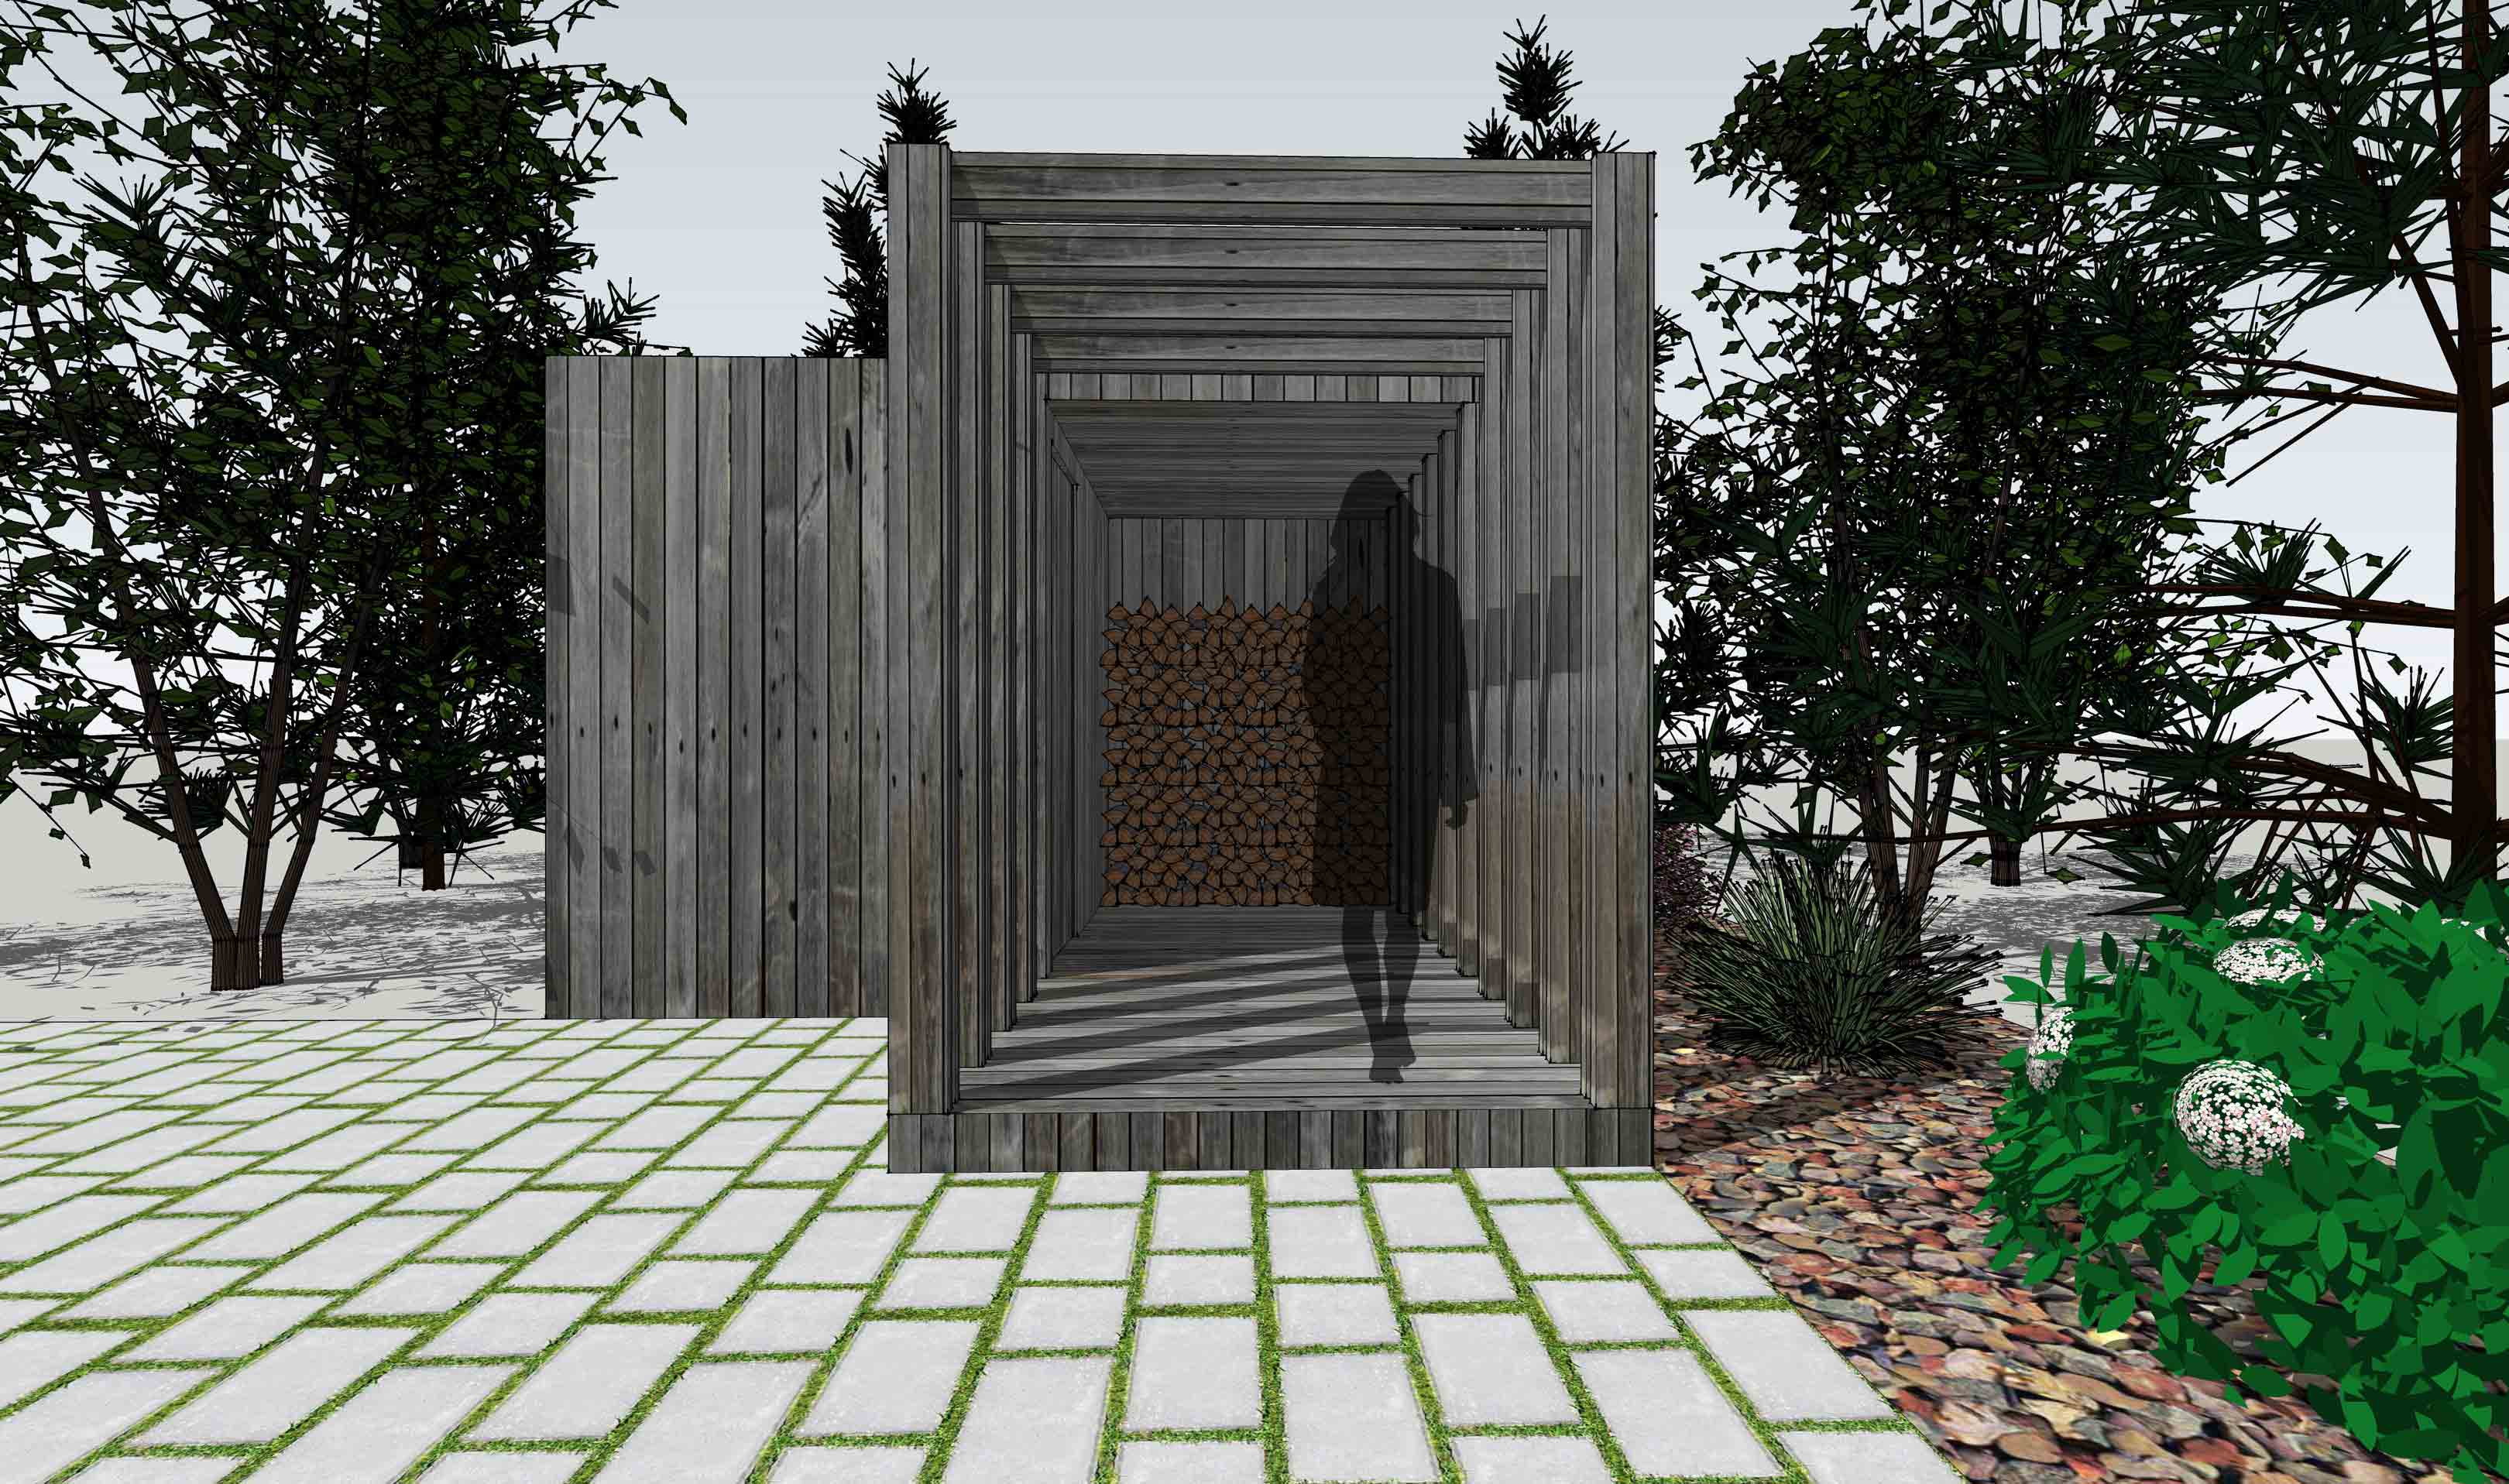 Perspective rendering of the front elevation of Sauna 01